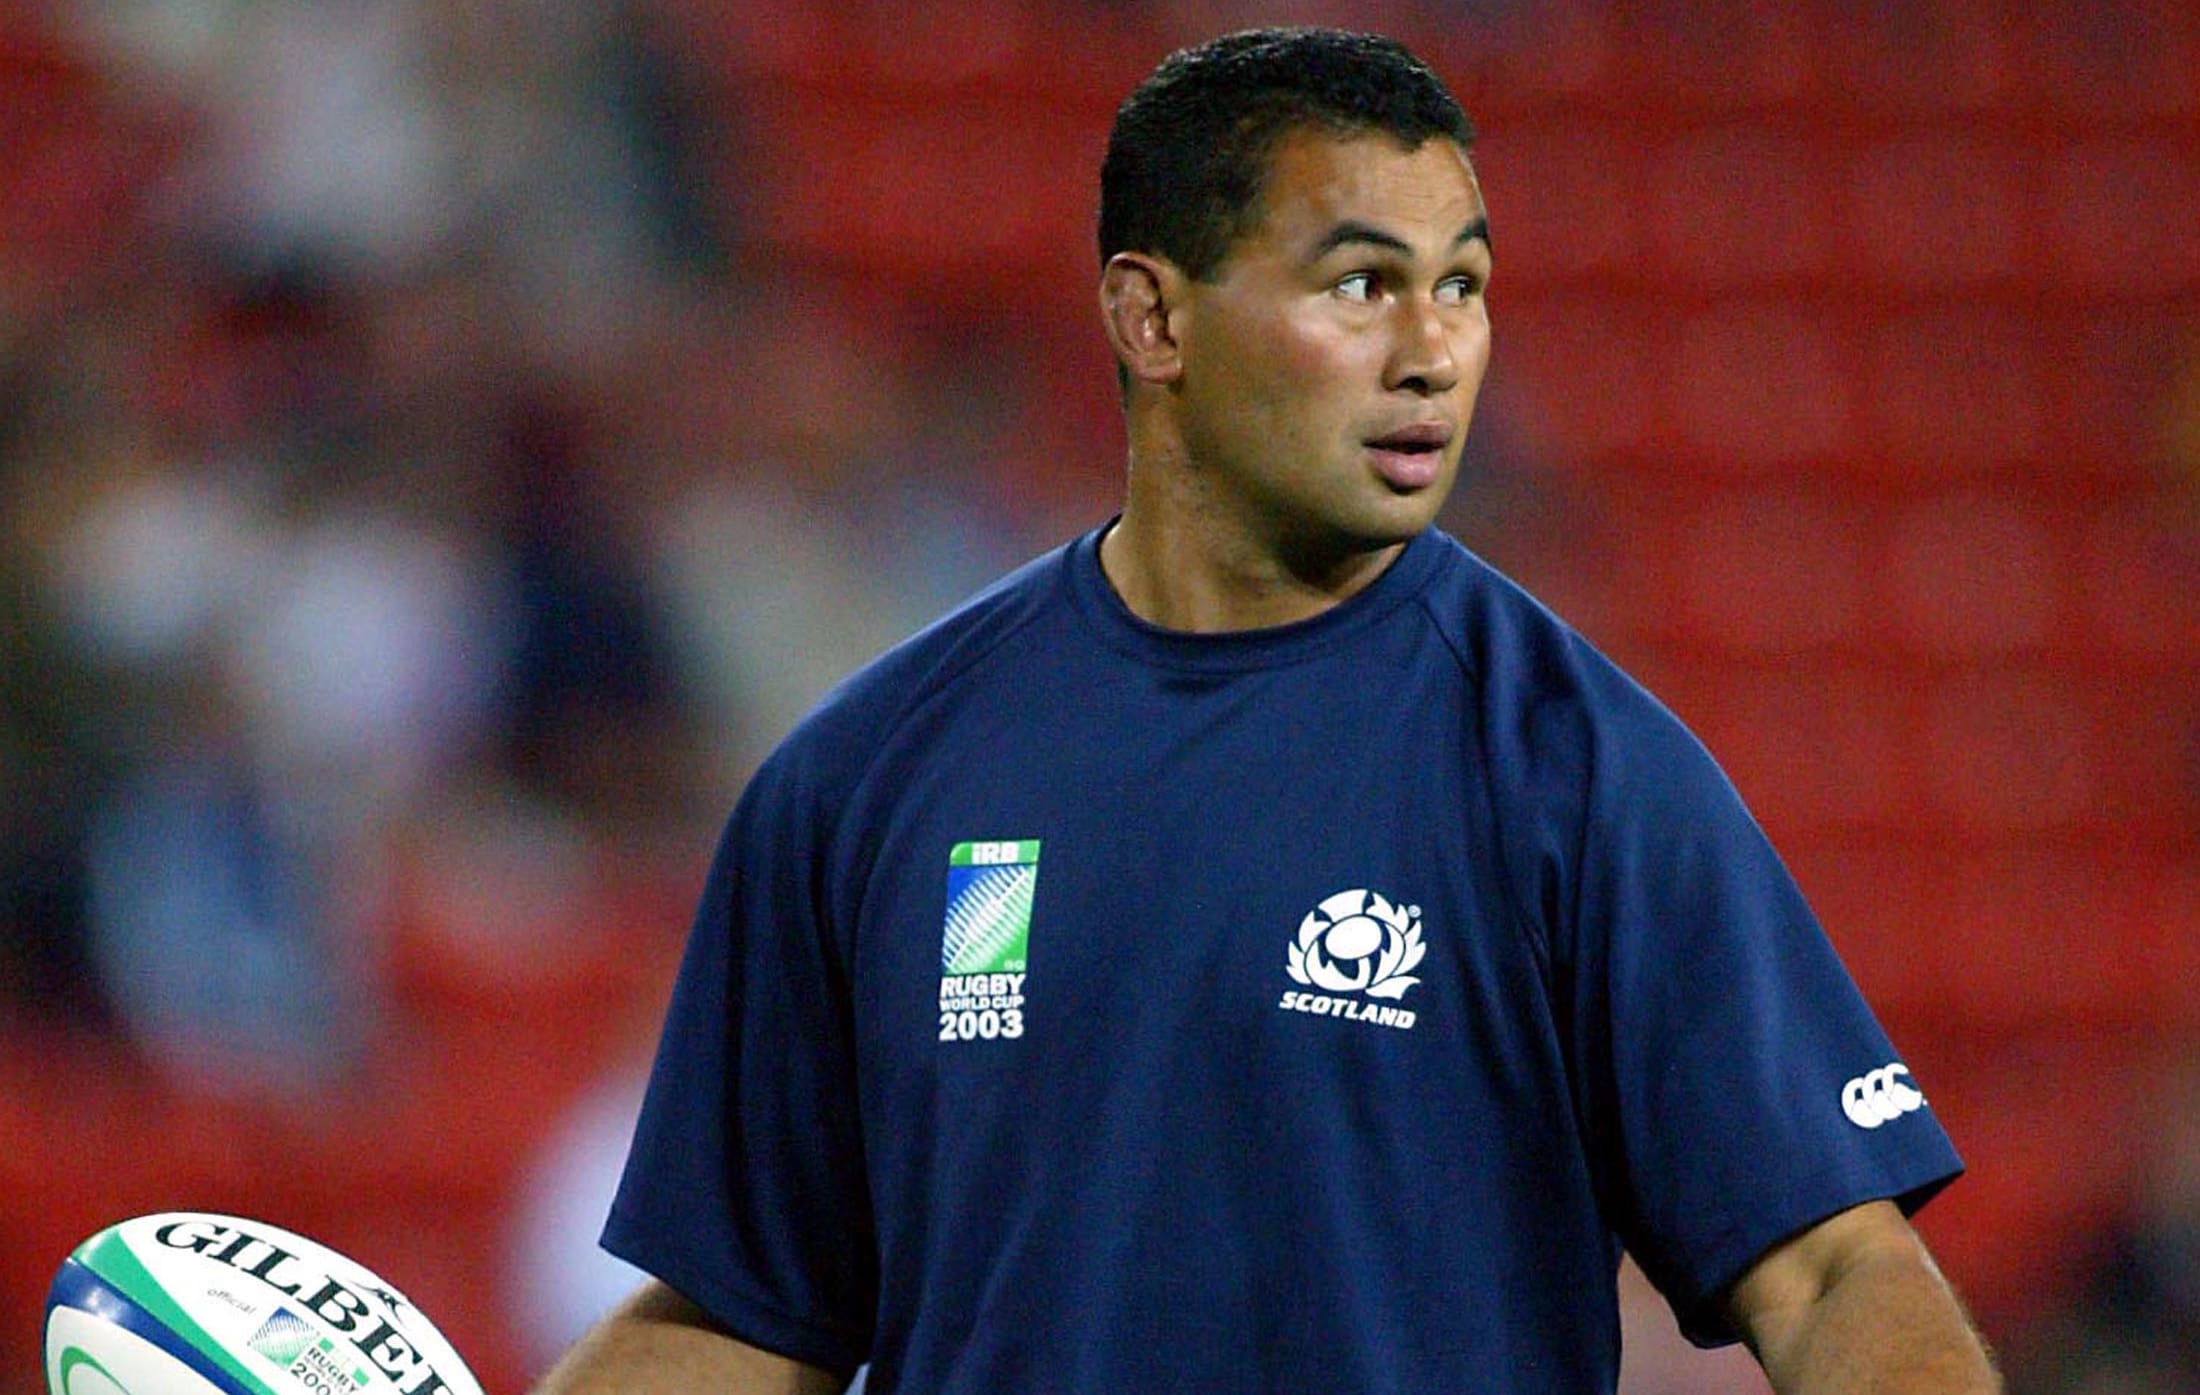 Pat Lam's coaching journey began as an assistant with Scotland. Seen here at the 2003 World Cup.